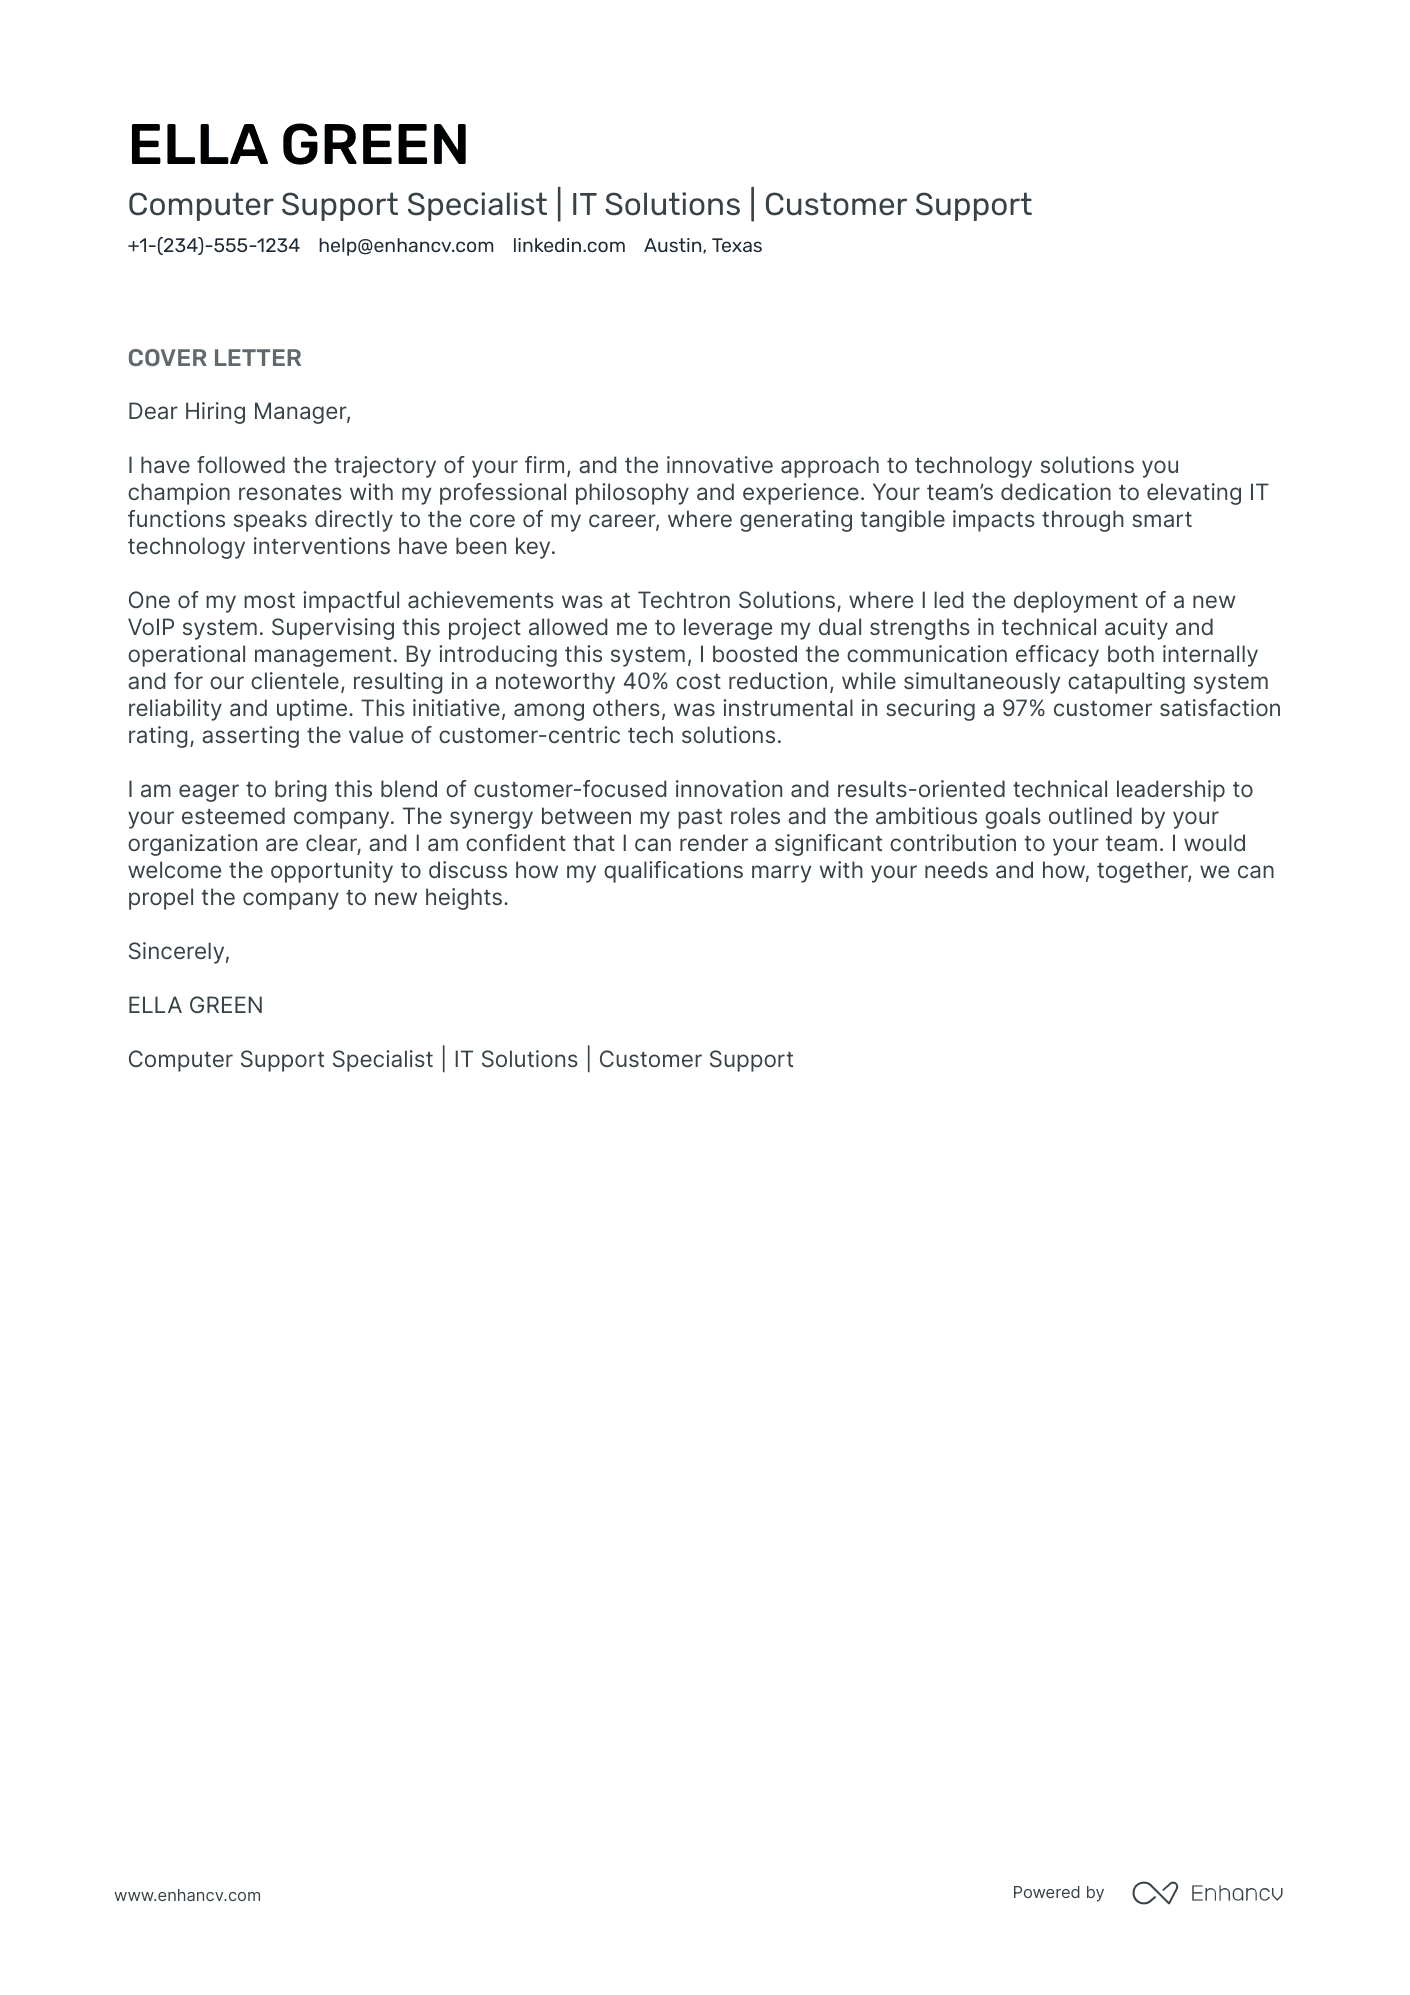 Computer Support Specialist cover letter